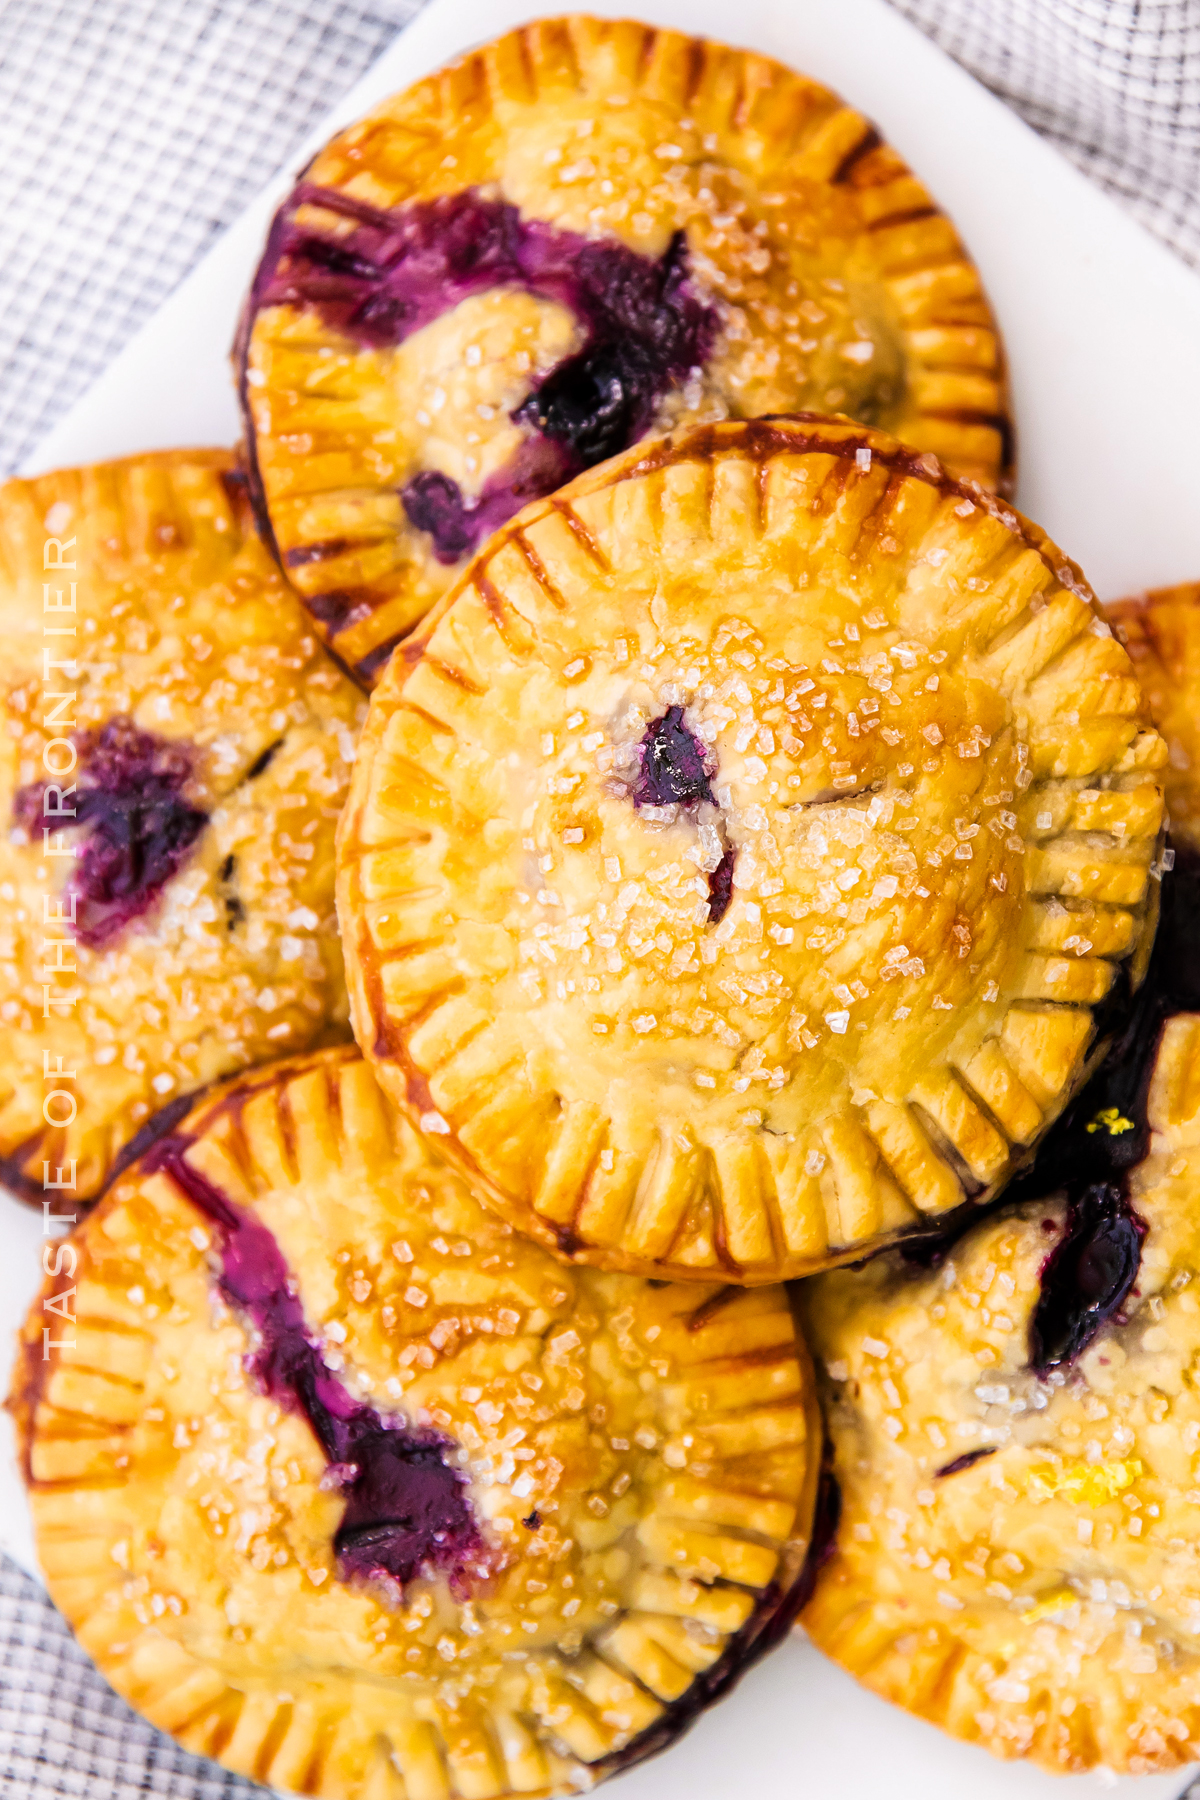 Blueberry Hand Pies